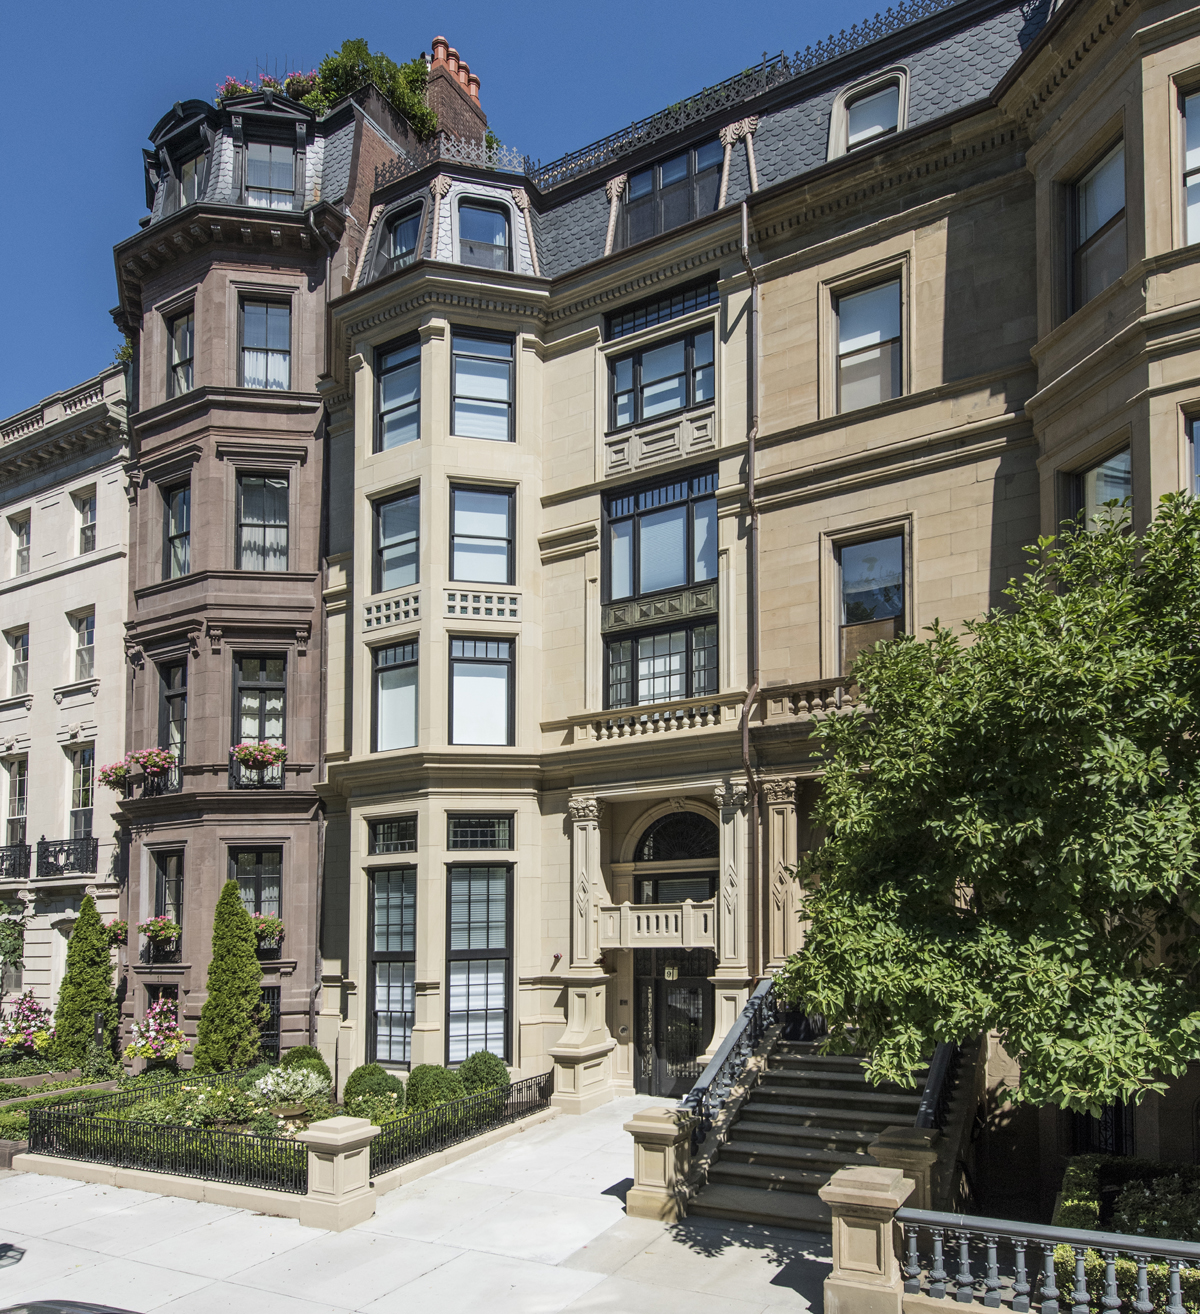 Townhouse & Apartments - Meyer & Meyer, Inc. Architecture and Interiors “9 Commonwealth Avenue, Boston”